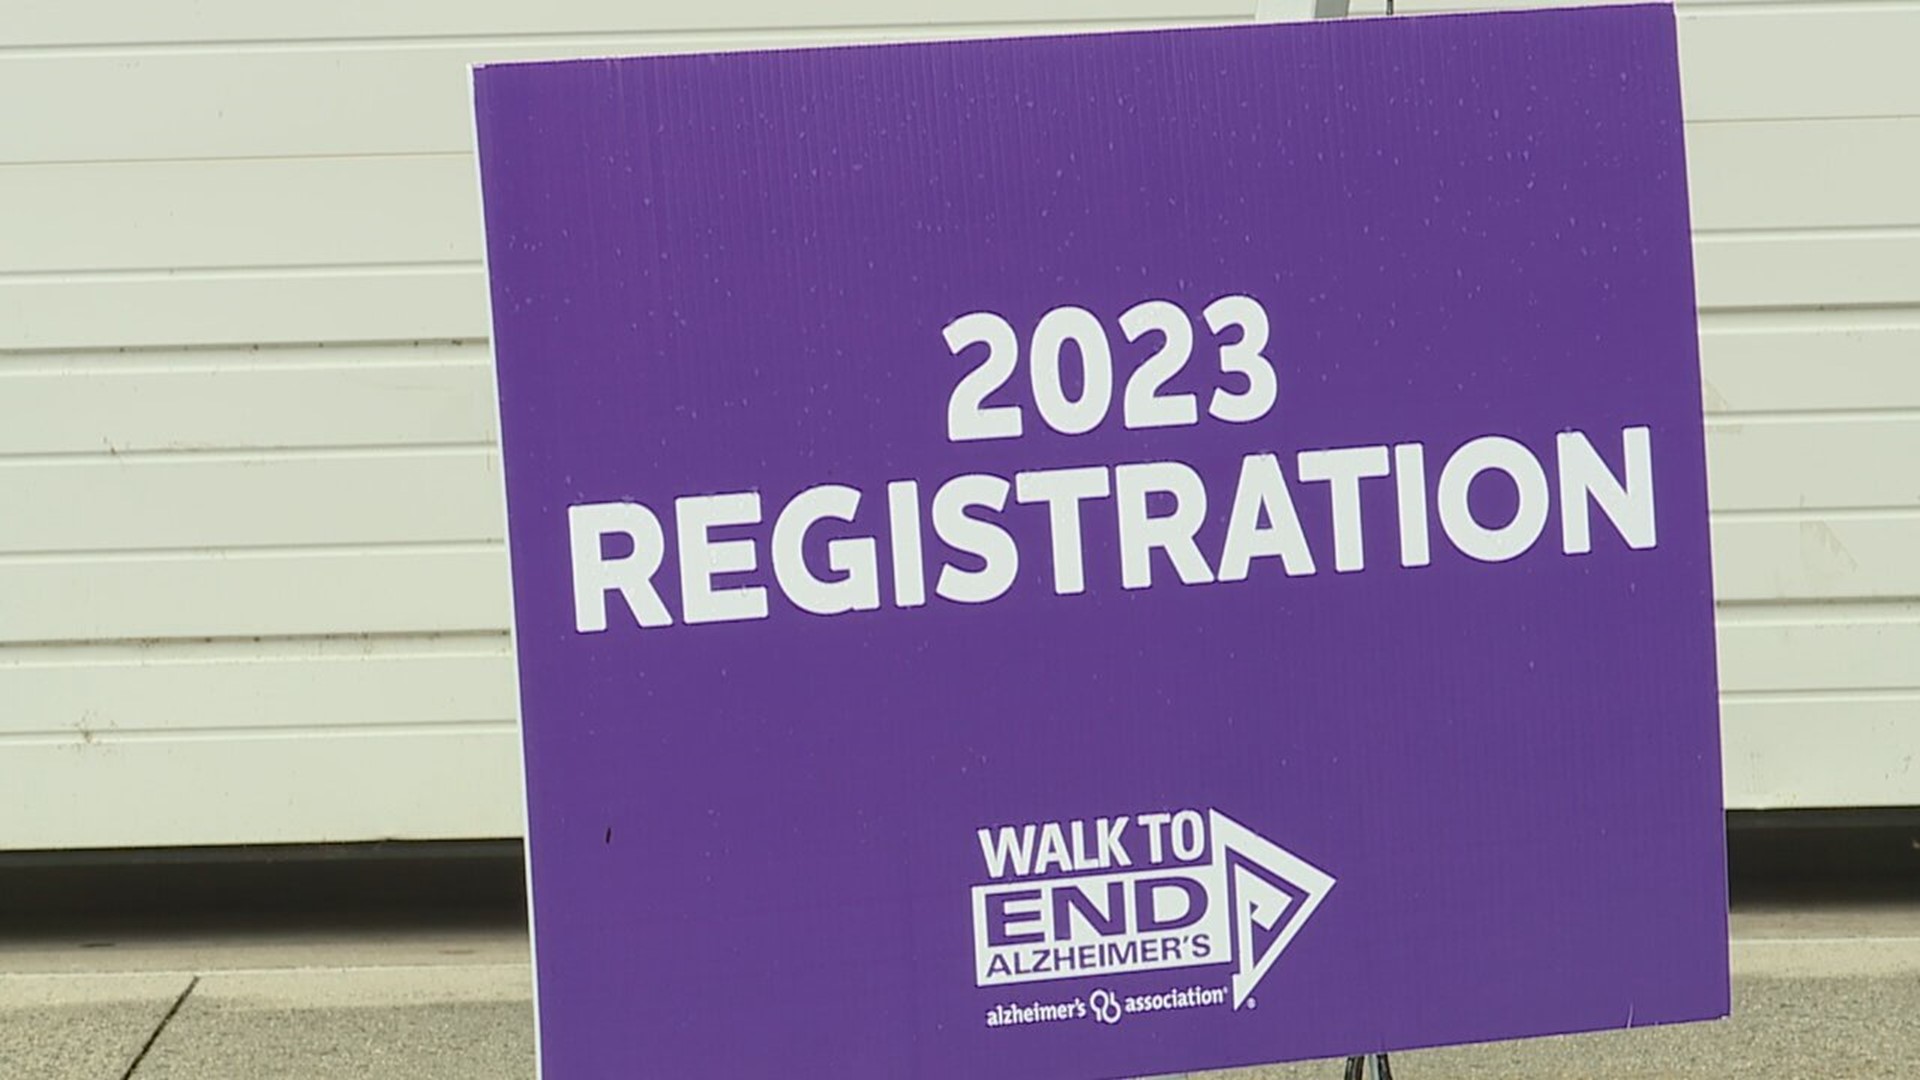 The Alzheimer's Association hosted their annual Walk to End Alzheimer’s on City Island. The organization hopes to raise $230,000 by Dec. 31.